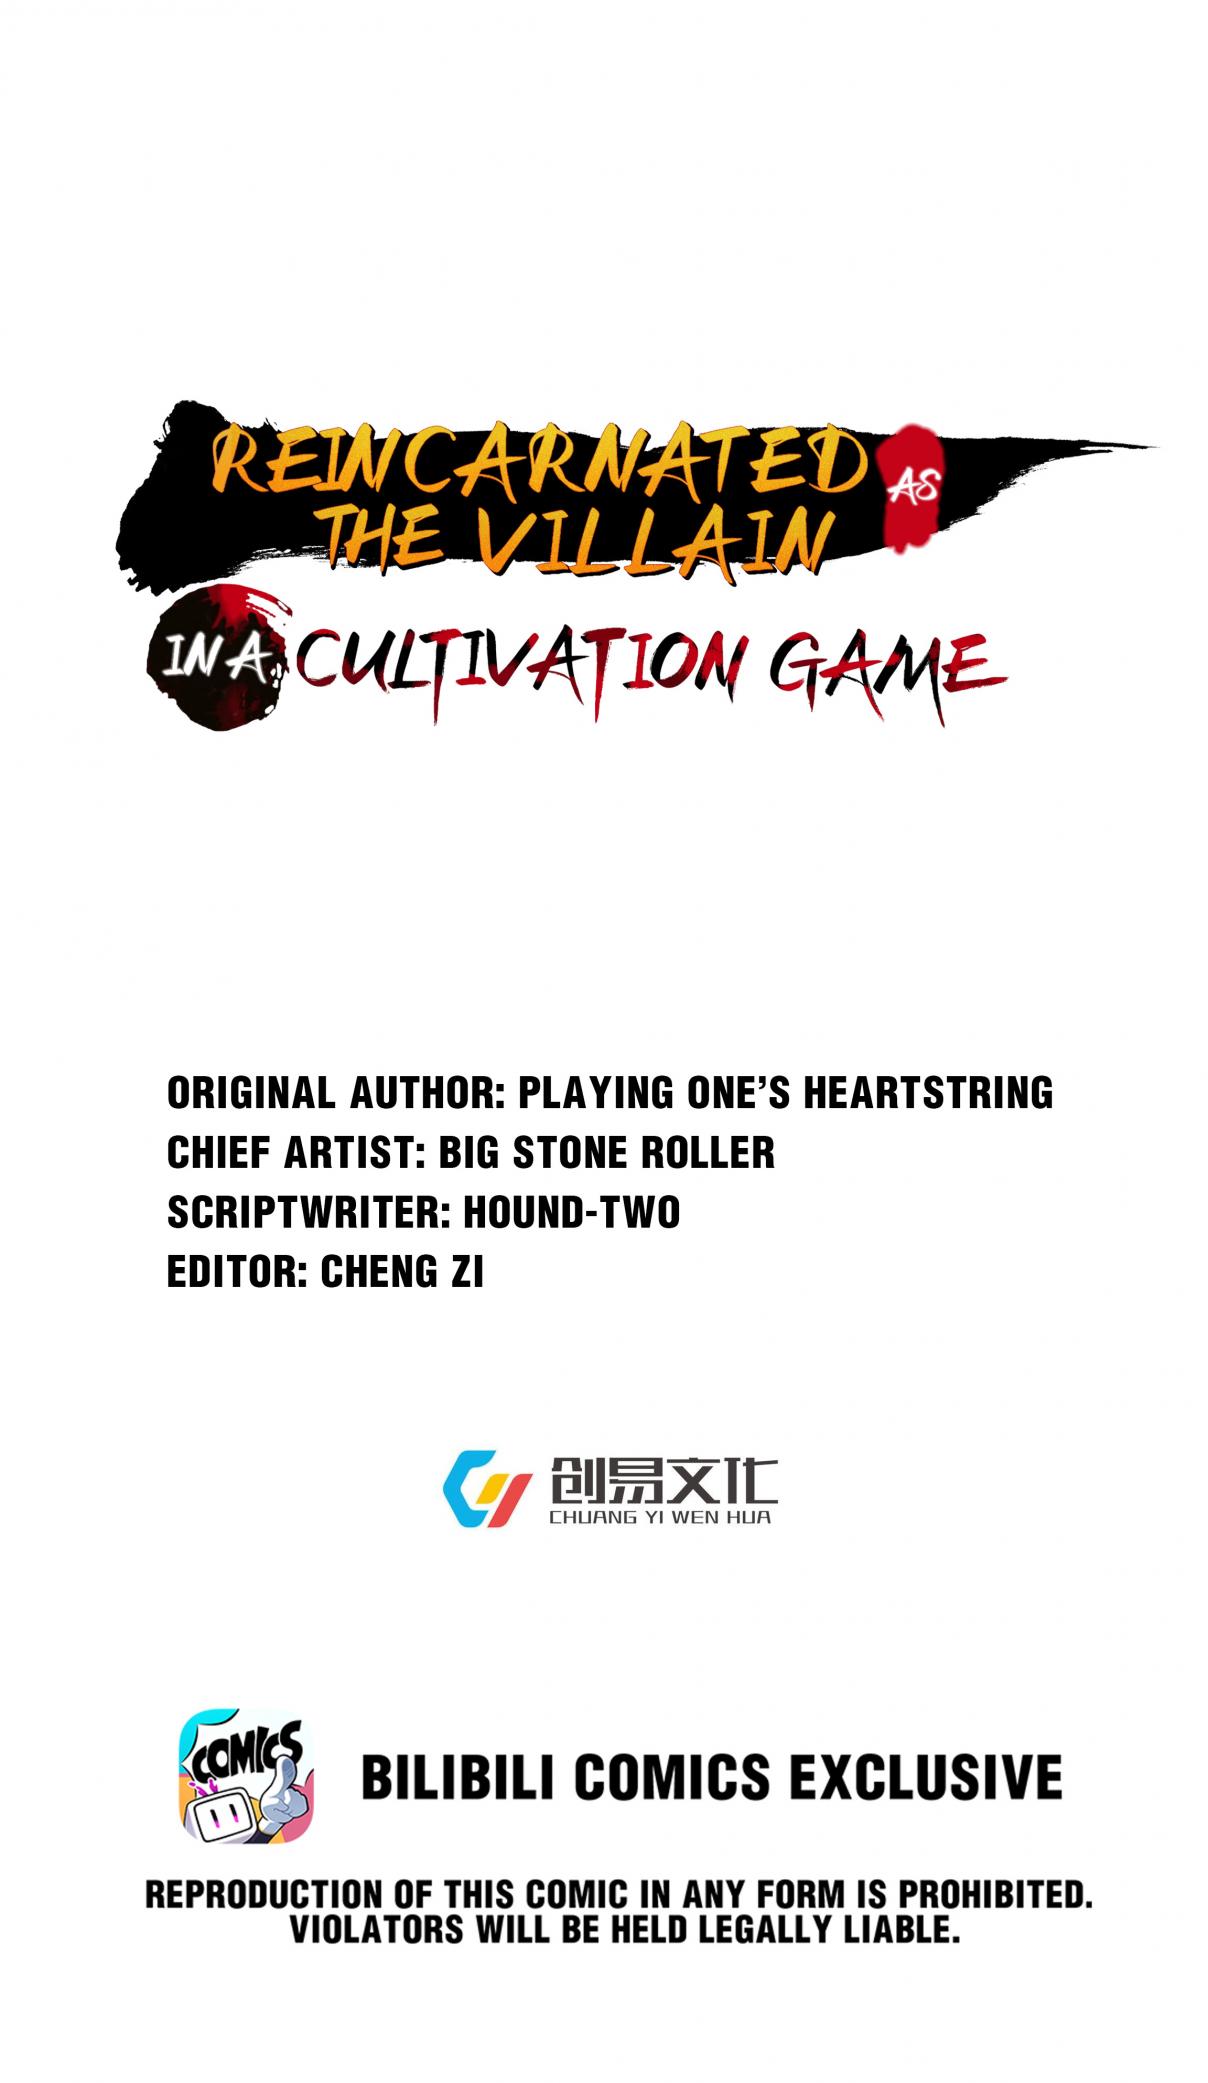 Reincarnated as the Villain in a Cultivation Game 47